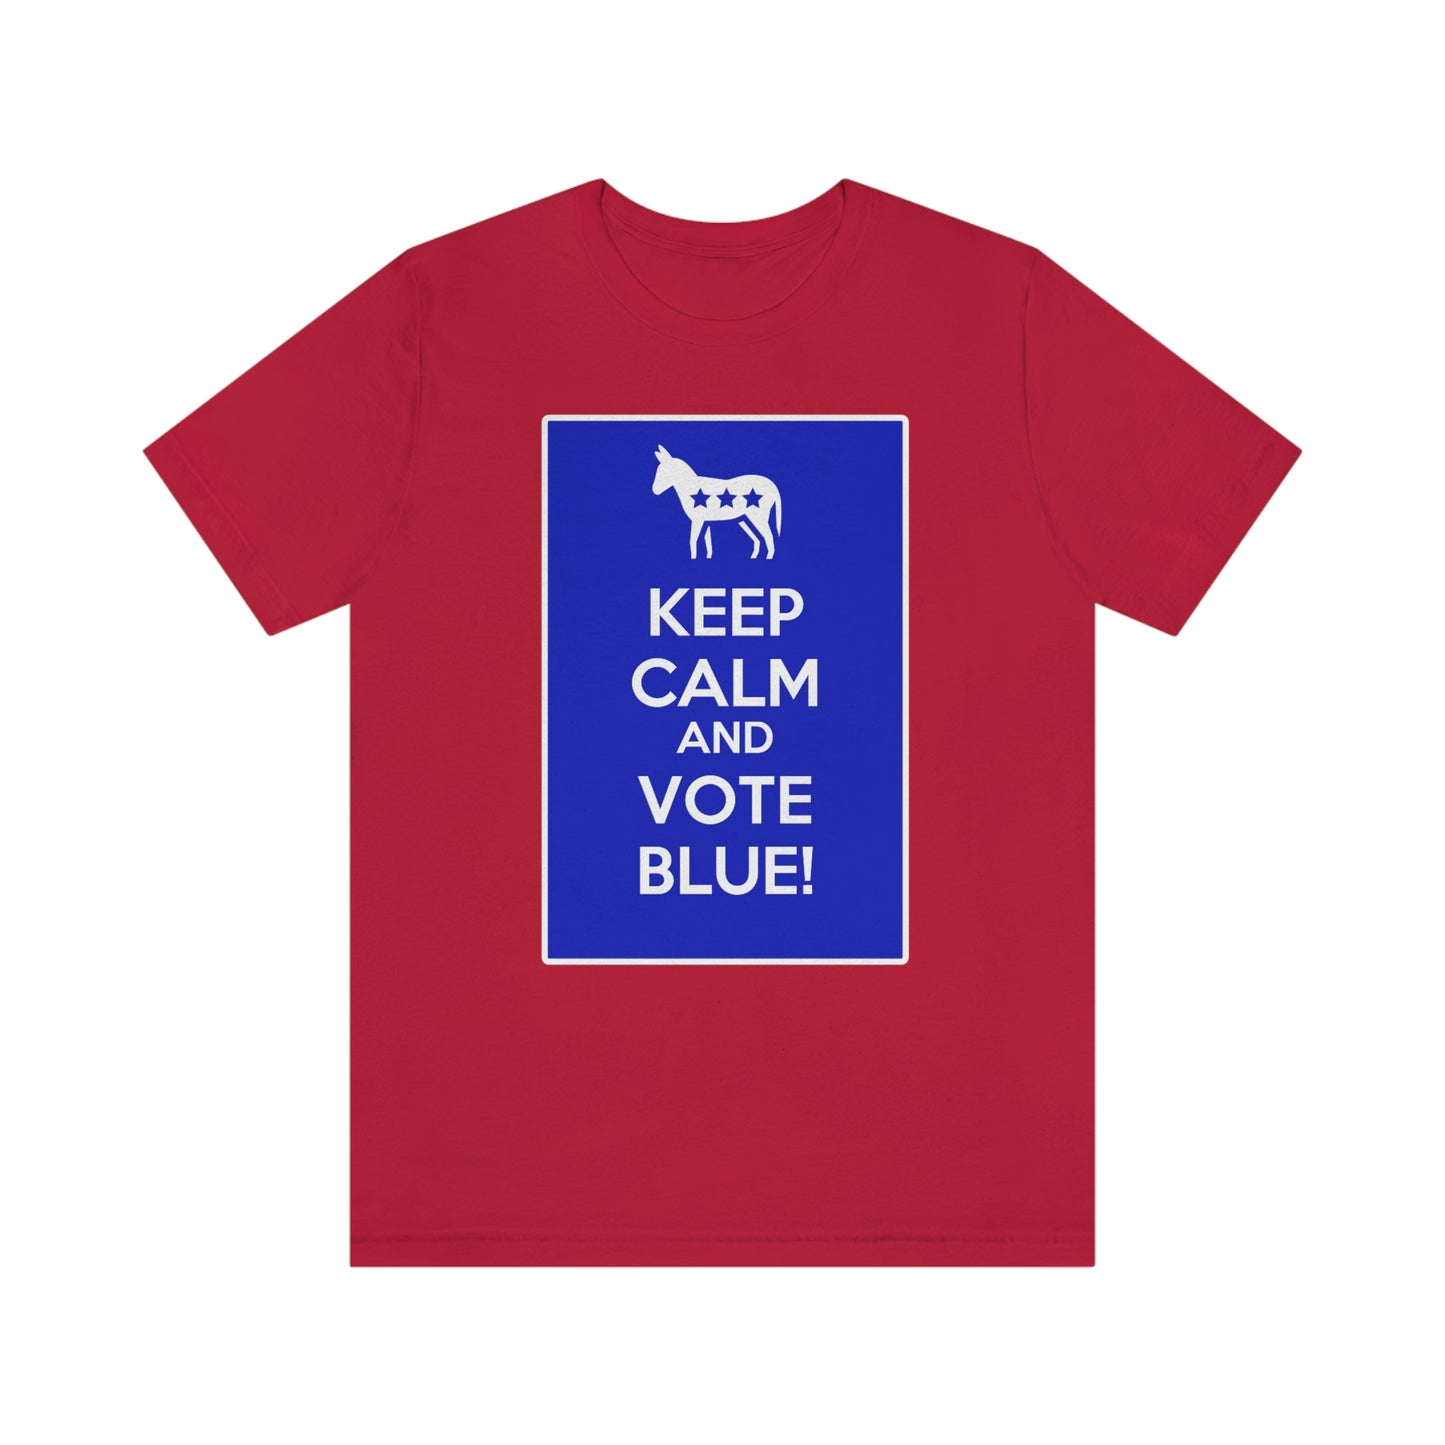 KEEP CALM AND VOTE BLUE Adult Unisex T-Shirt